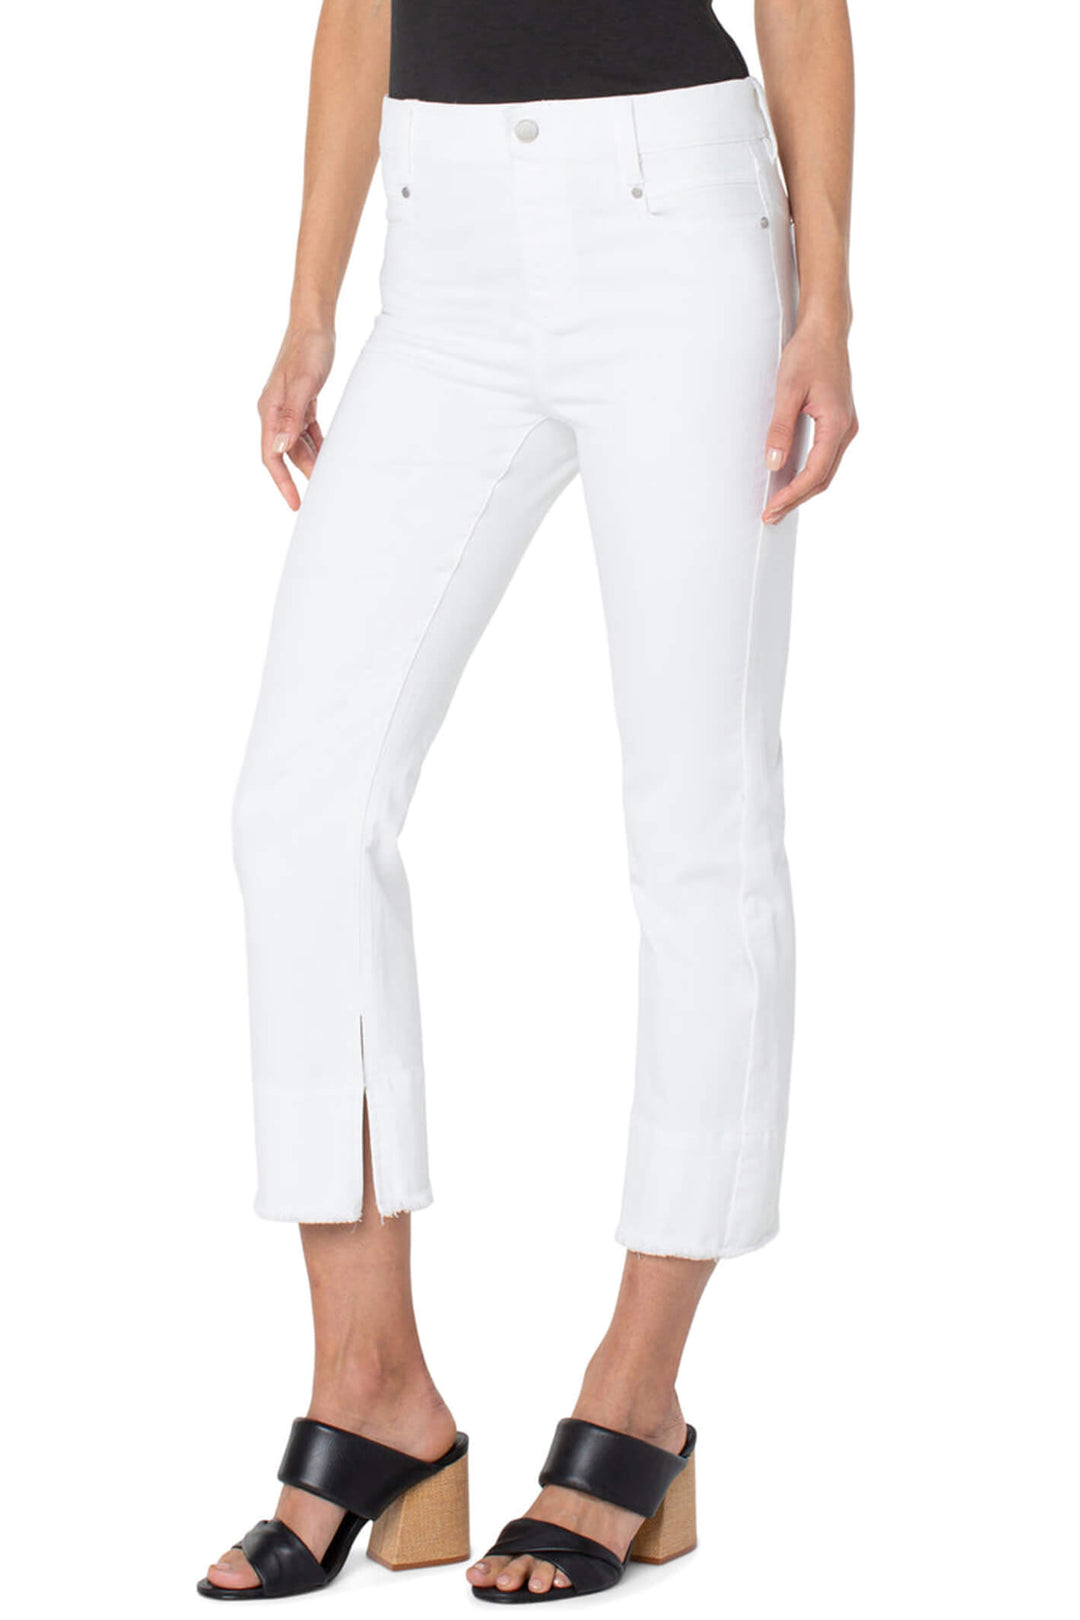 Liverpool Jeans LM7759QY-W-3156 Gia Glider™ Crop Flare Bright White - Olivia Grace Fashion